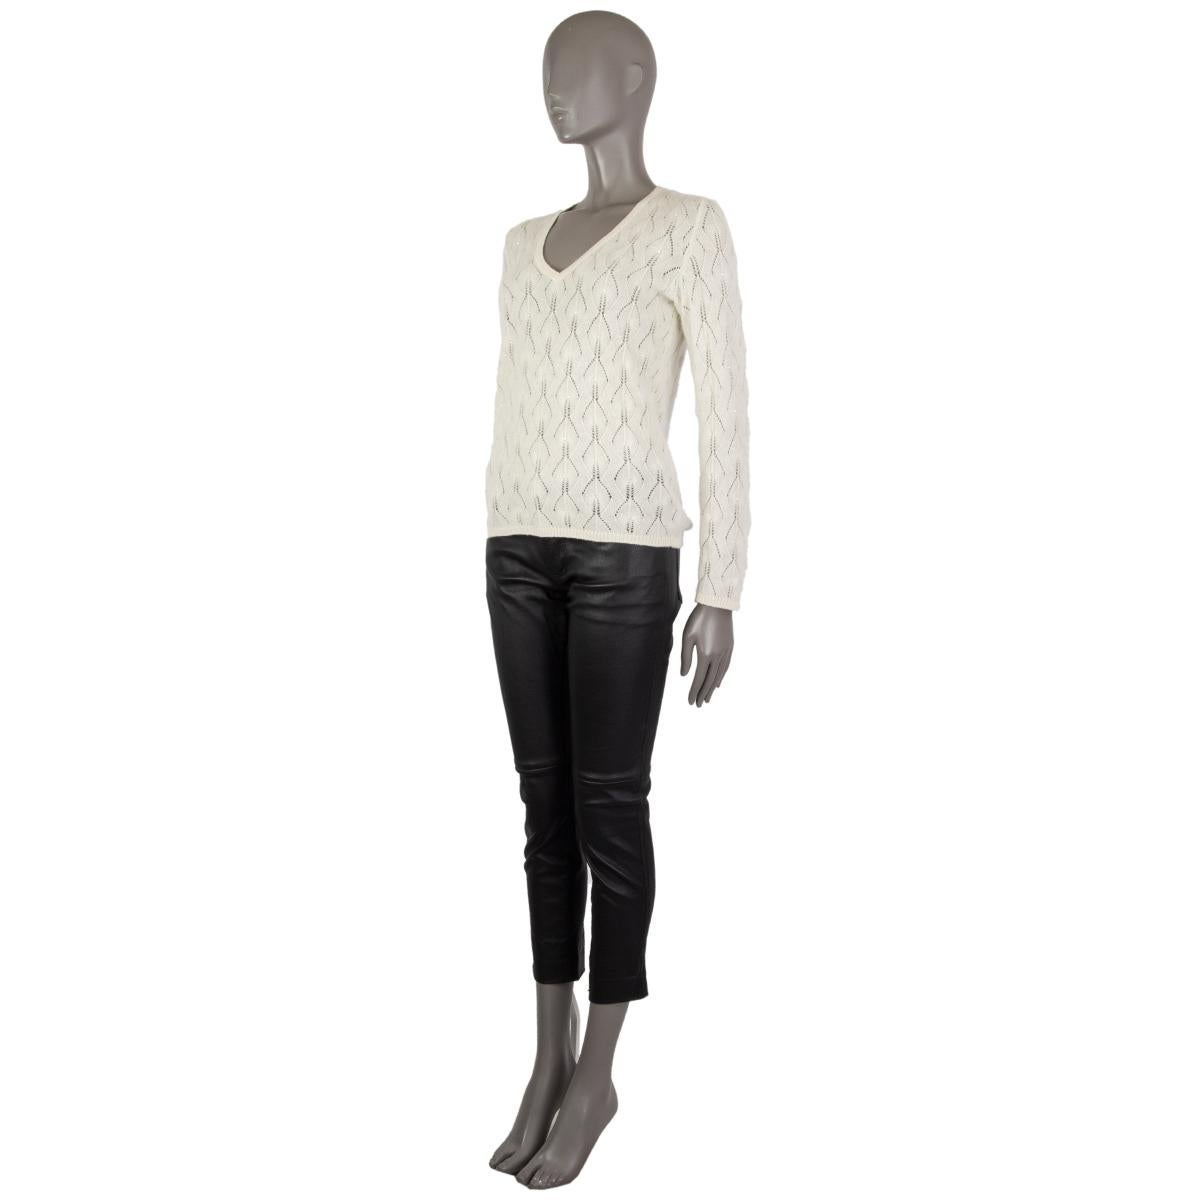 Loro Piana crystal embellished knit pattern sweater in cream cashmere (100%) with a v-neck. Unlined. Has been worn and is in excellent condition. 

Tag Size 44
Size L
Shoulder Width 41cm (16in)
Bust 90cm (35.1in) to 94cm (36.7in)
Waist 84cm (32.8in)